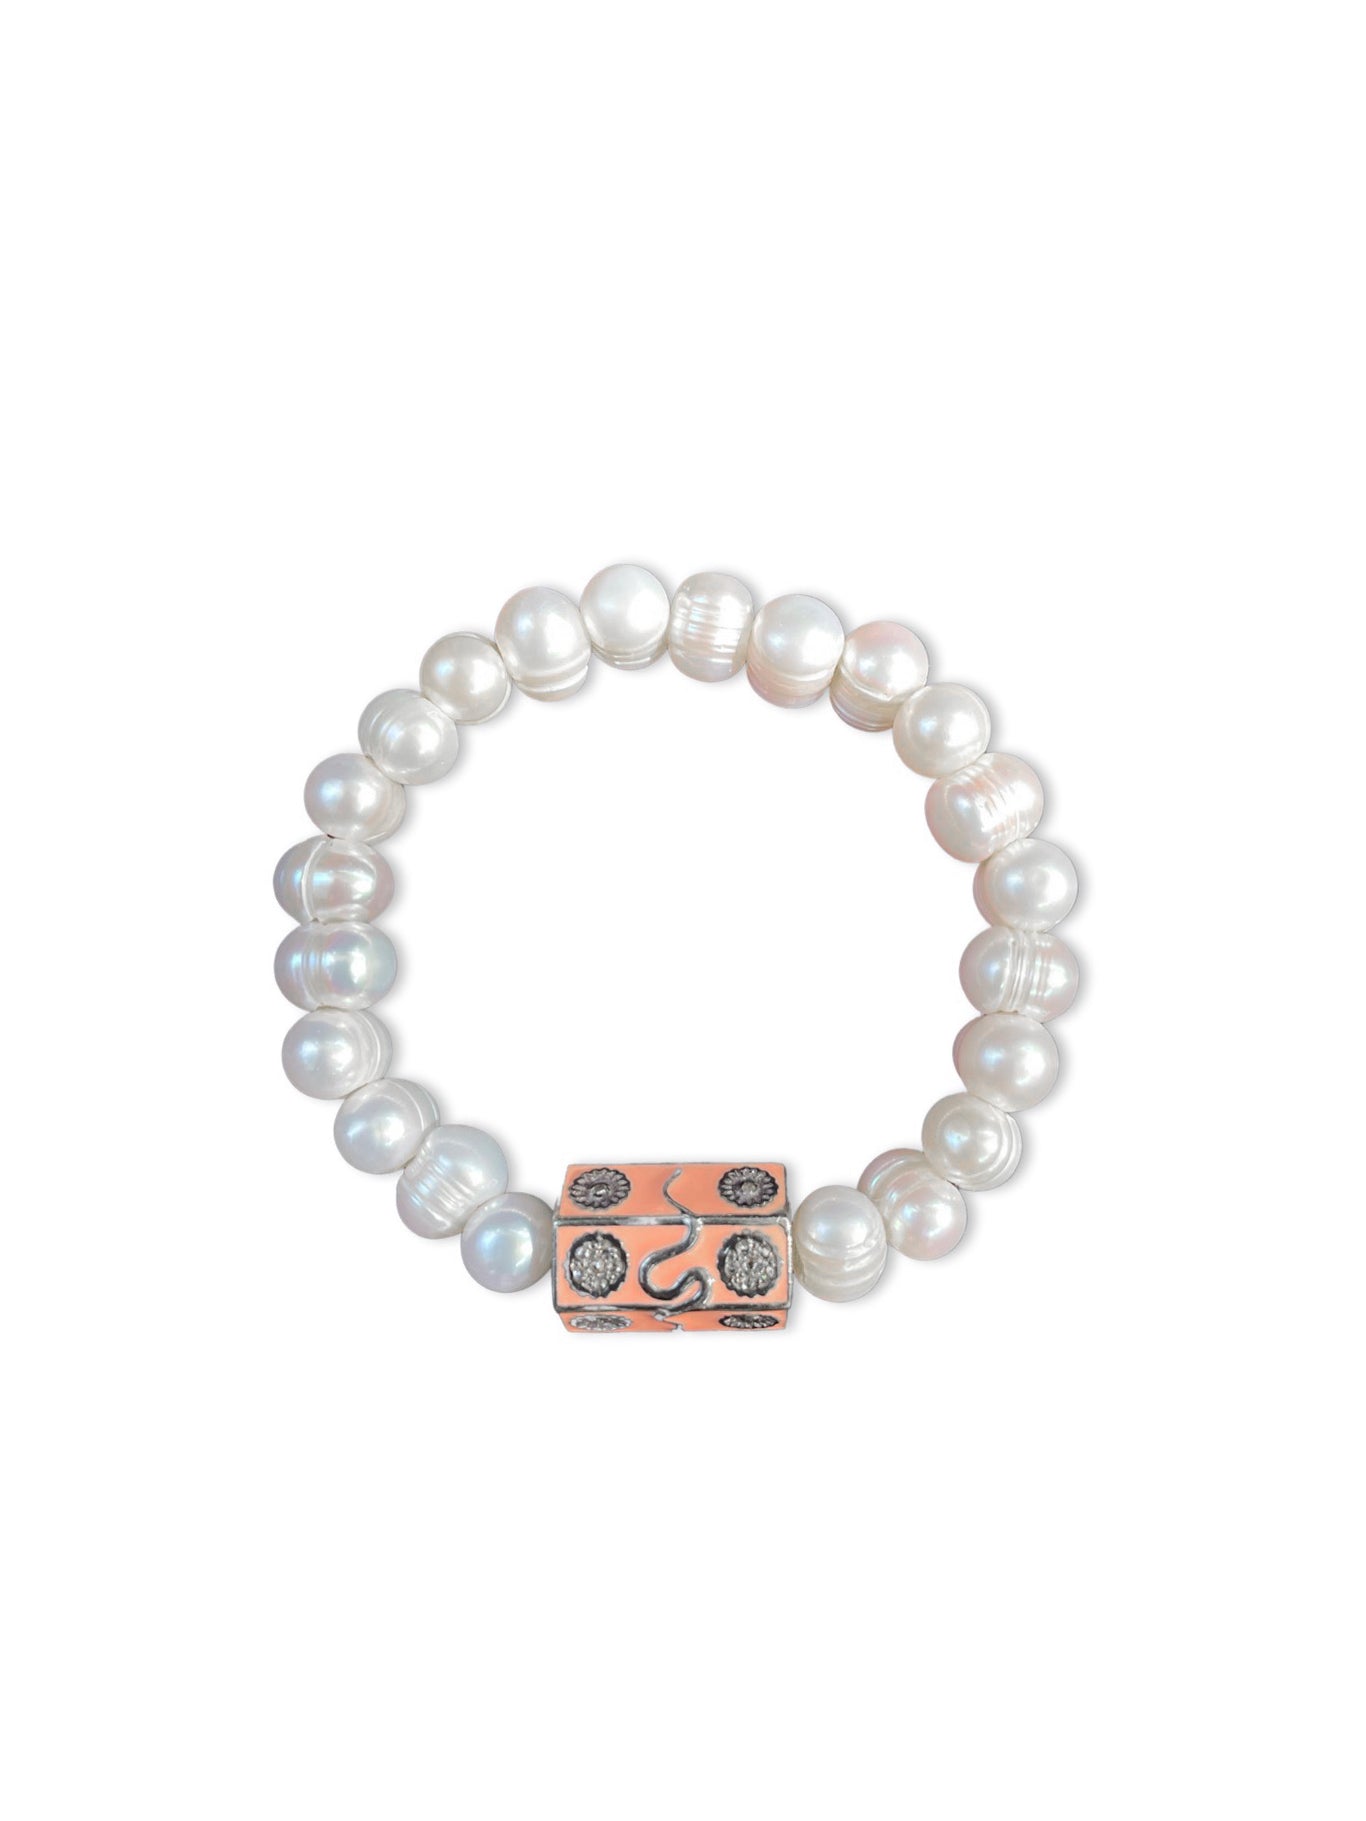 Freshwater Pearls with Pave Diamond Enamel Bead